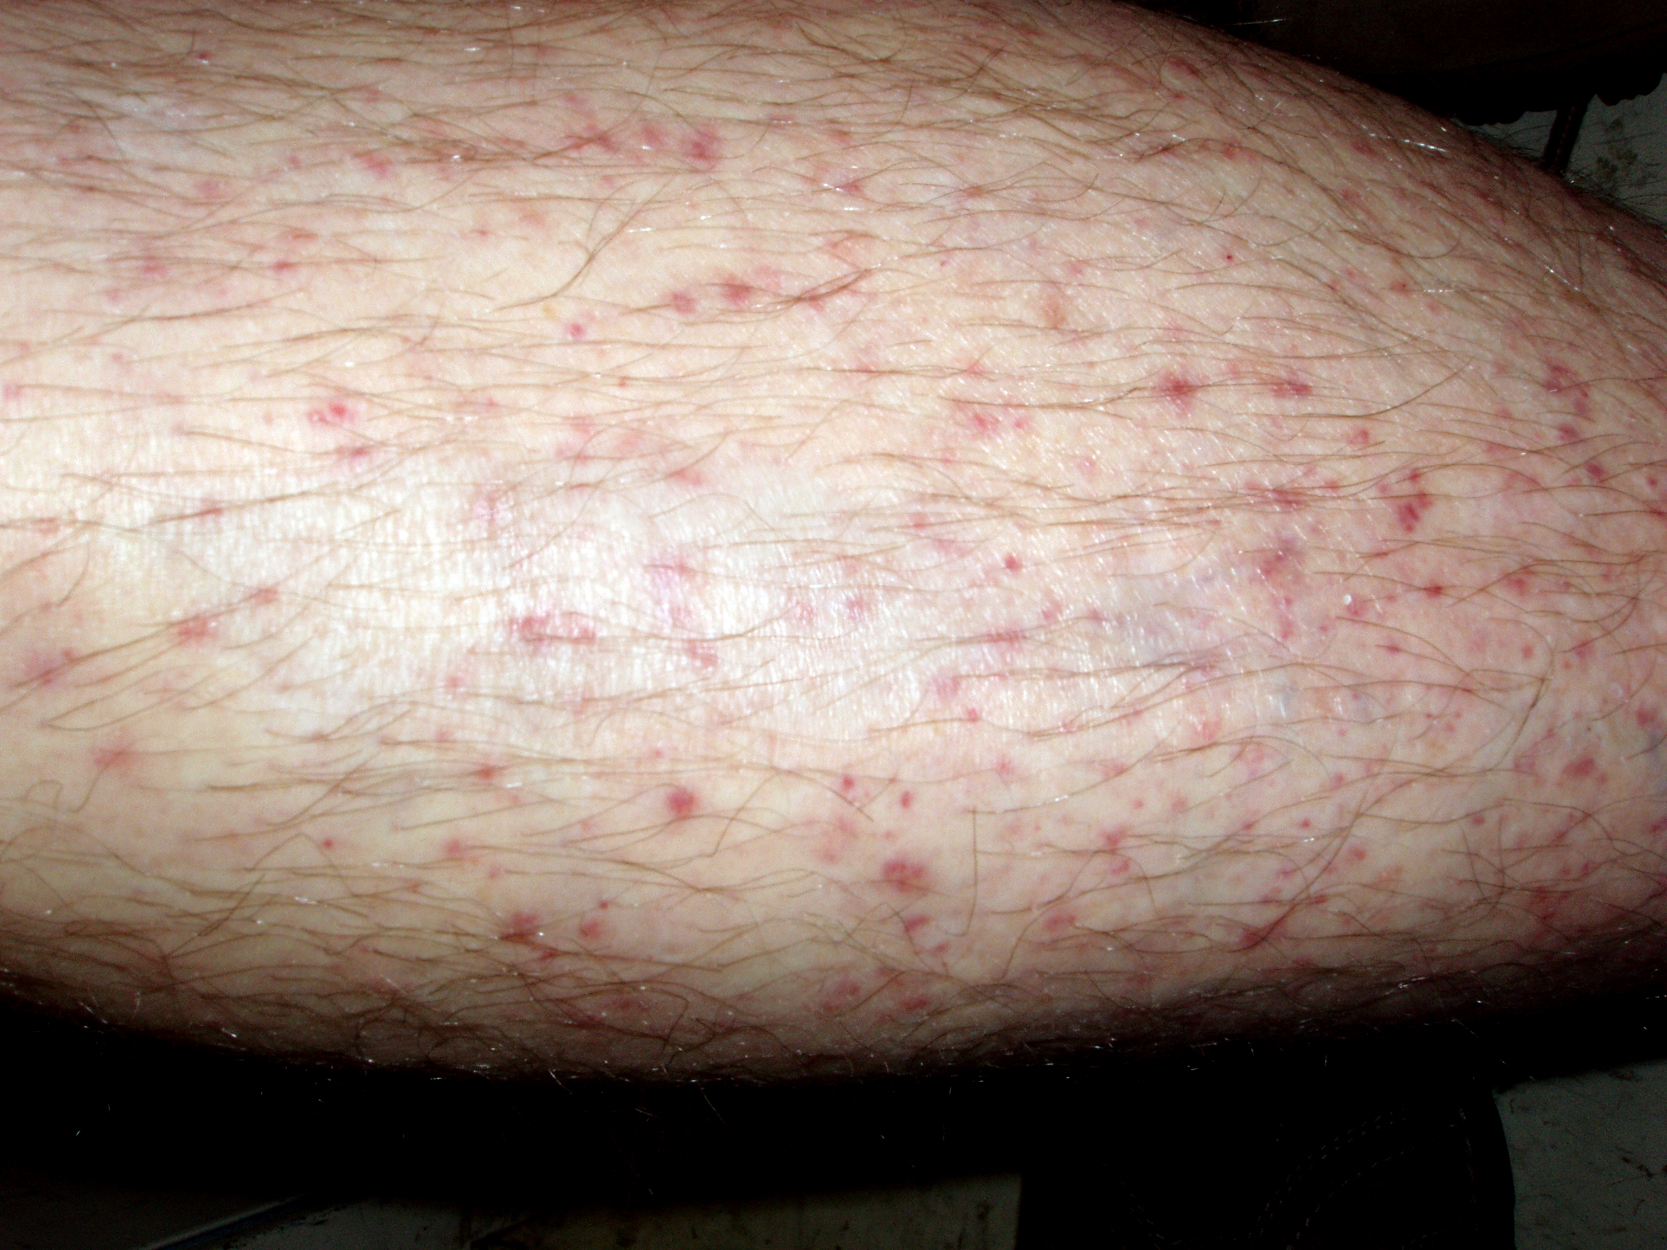 Vasculitis: In this instance, idiopathic.